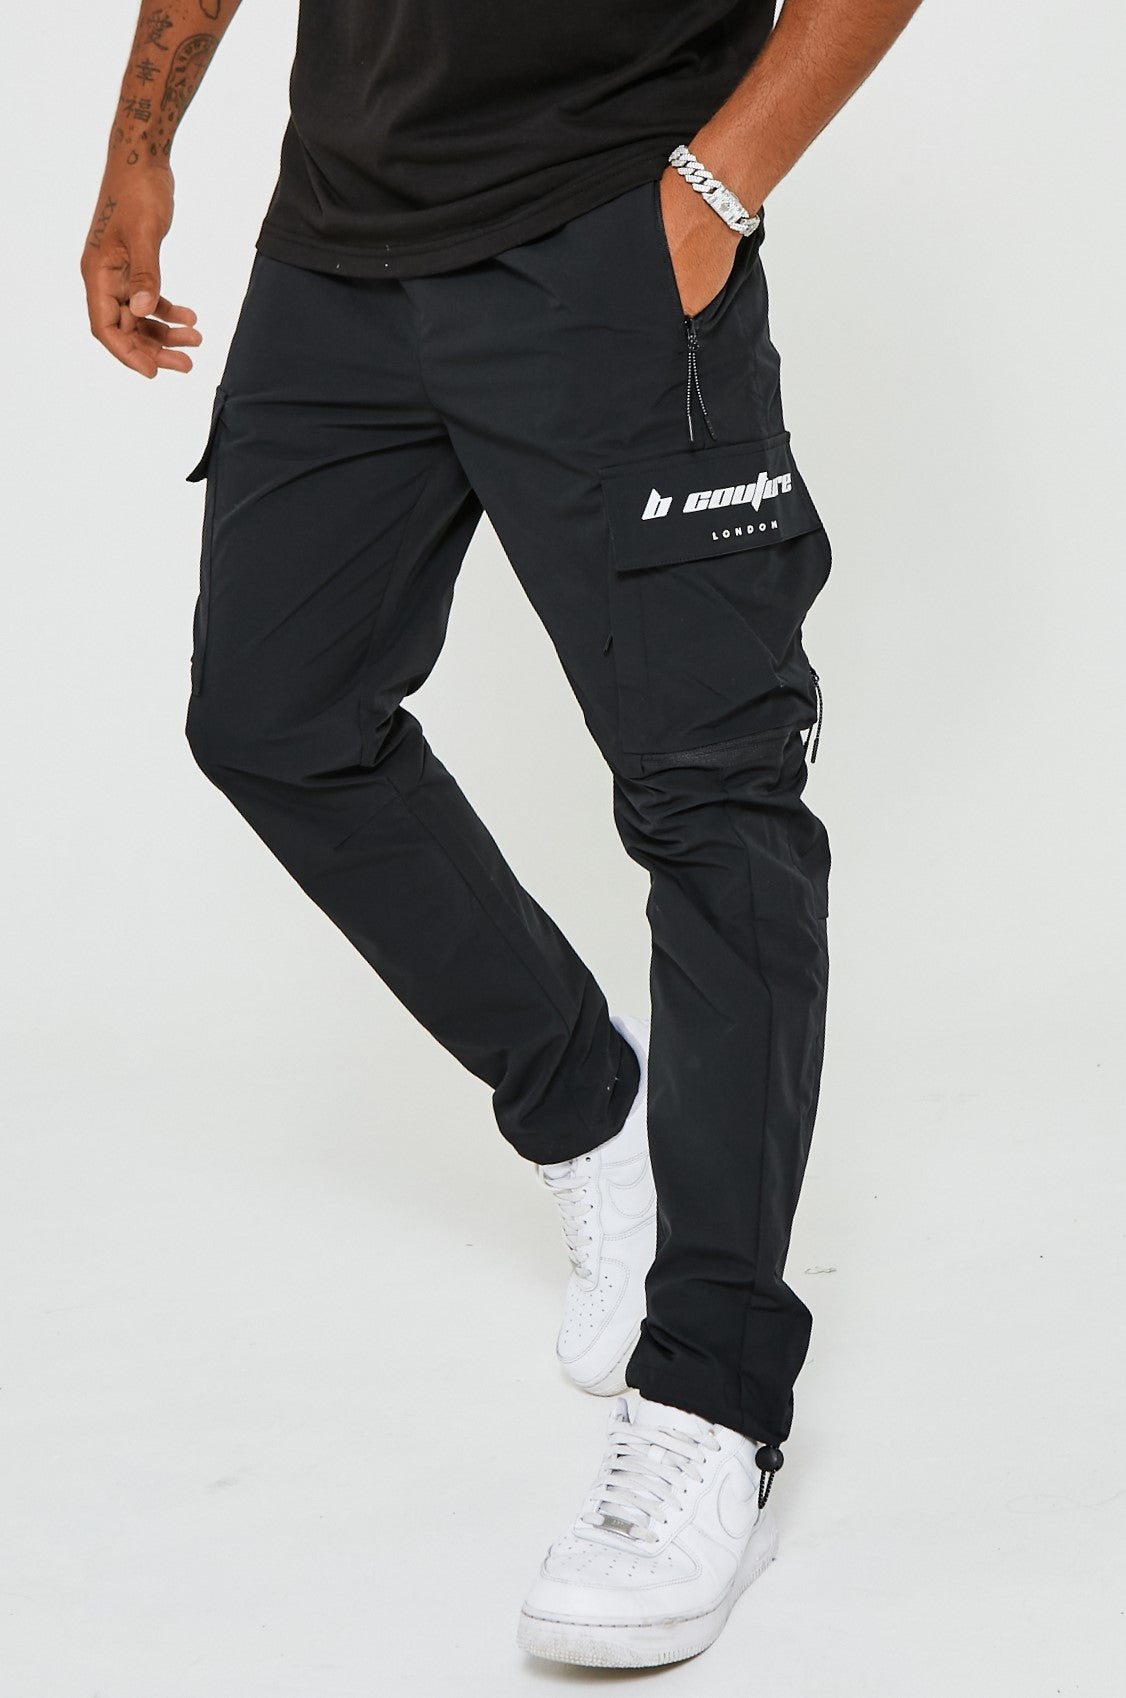 King Street Tapered Cargo Woven Pants - Black